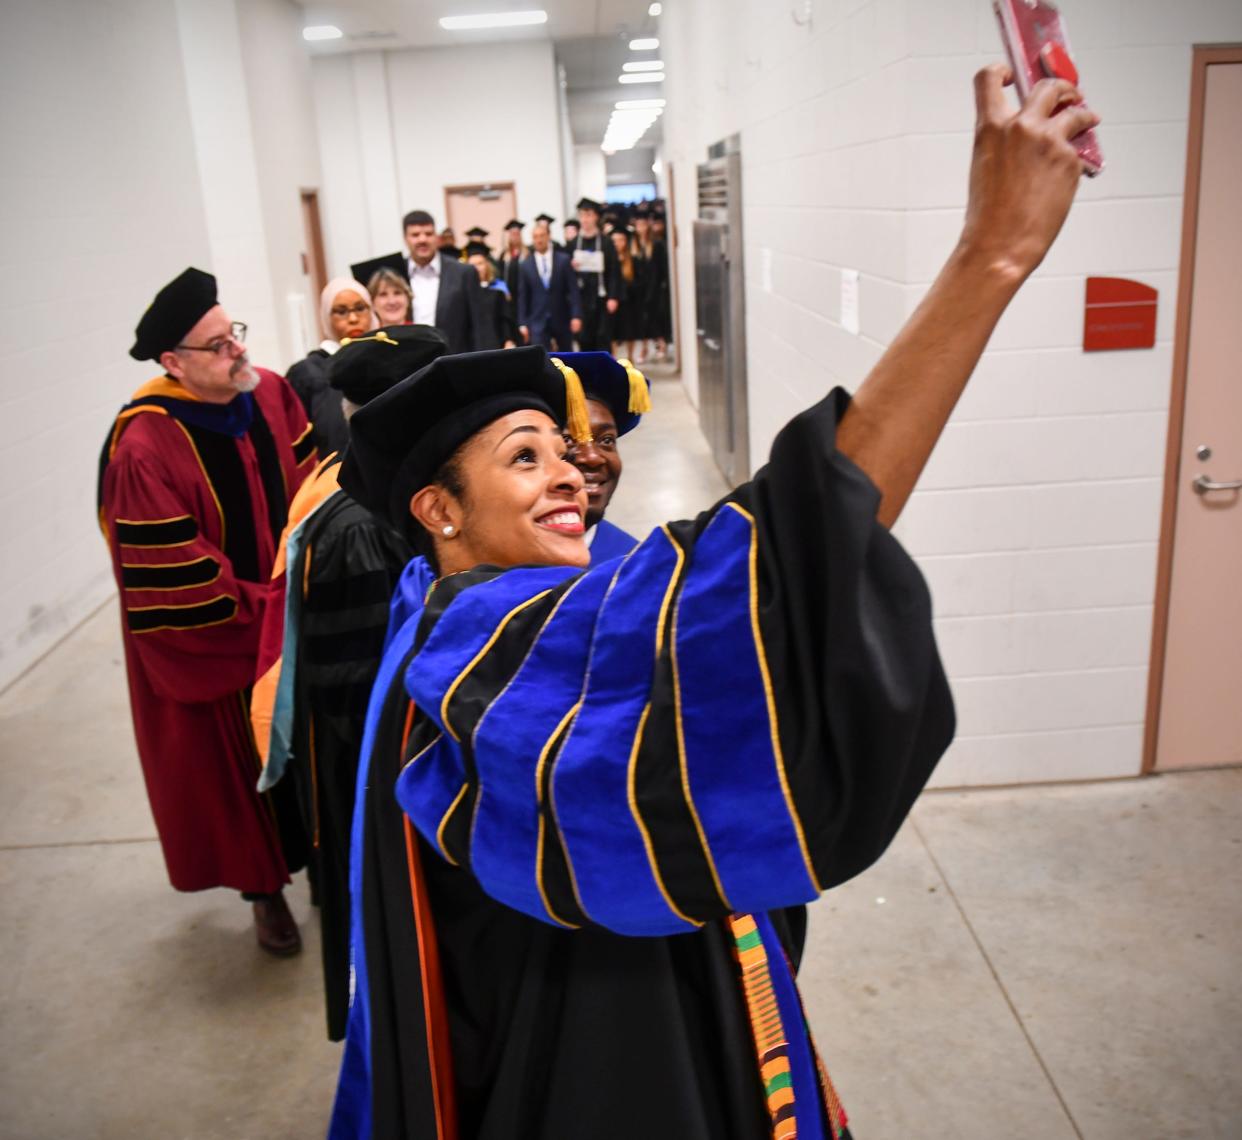 St. Cloud Technical & Community College president Annesa Cheek takes a selfie before the start of commencement exercises Friday, May 17, 2019, at the River's Edge Convention Center in St. Cloud.